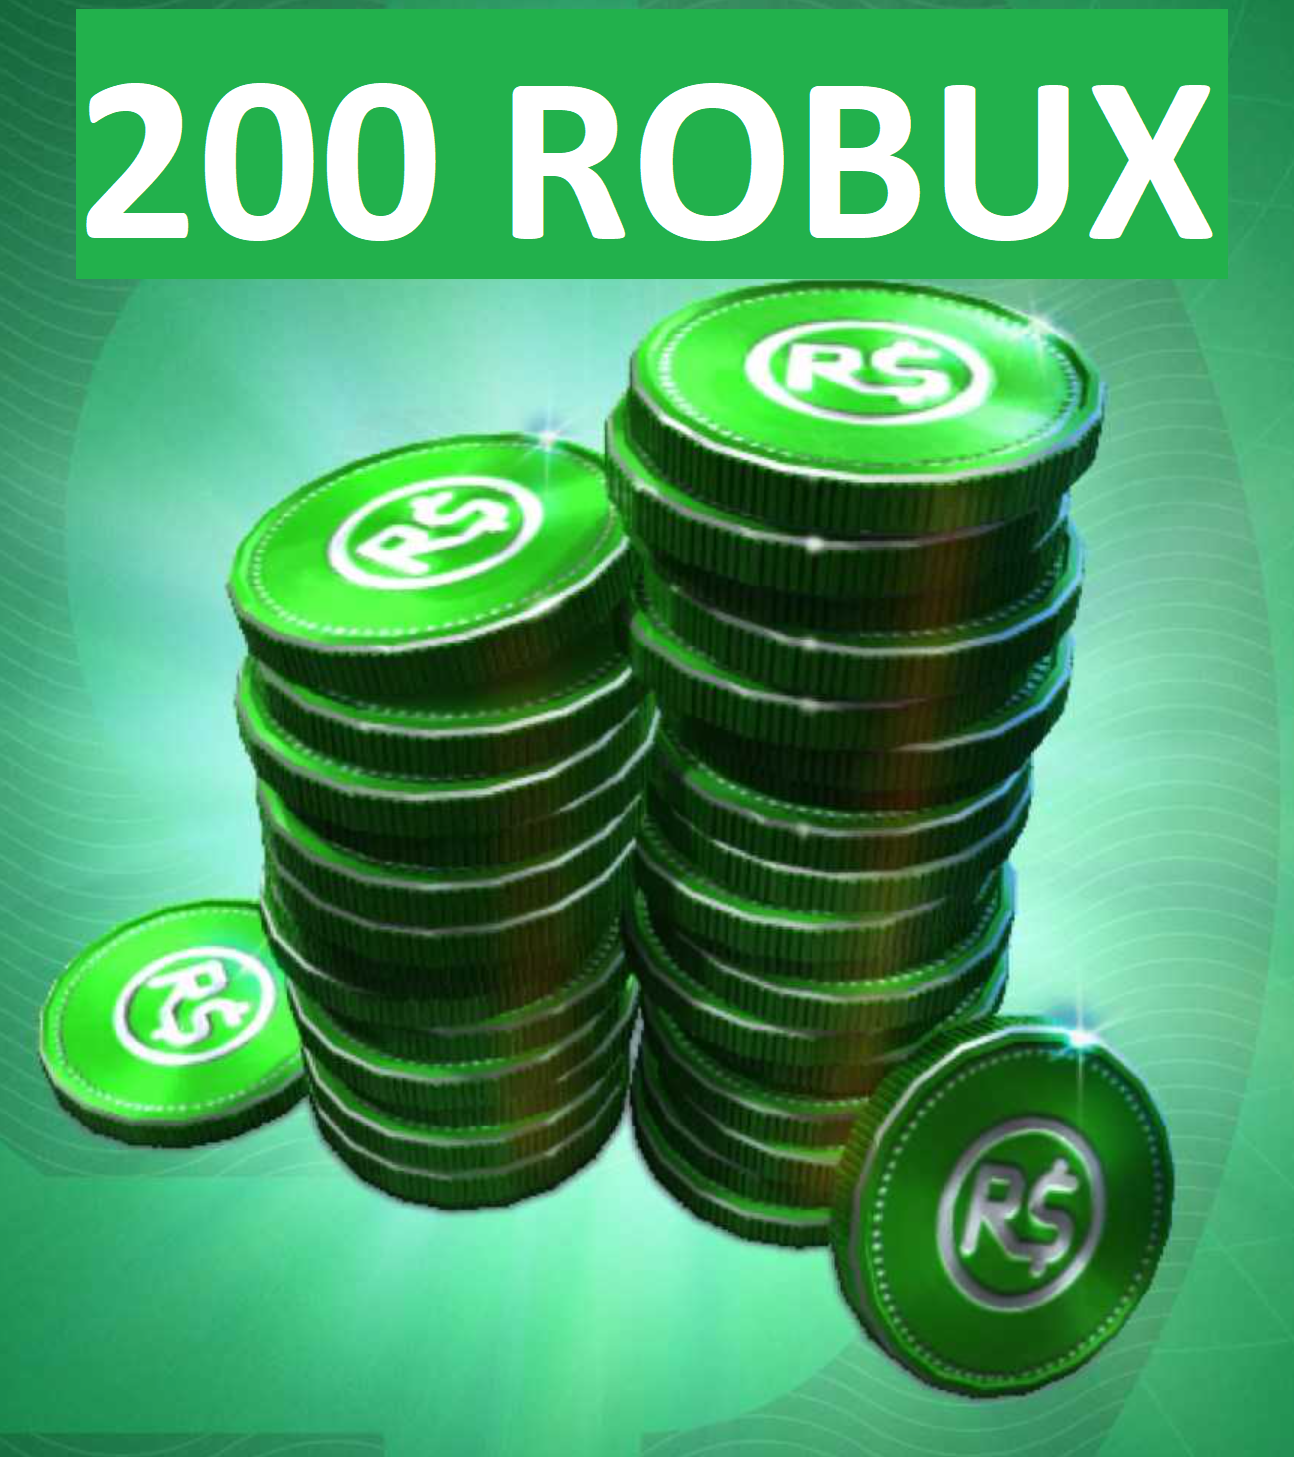 Buy Roblox Gift Card 200 Robux Global And Download - free 200 robux